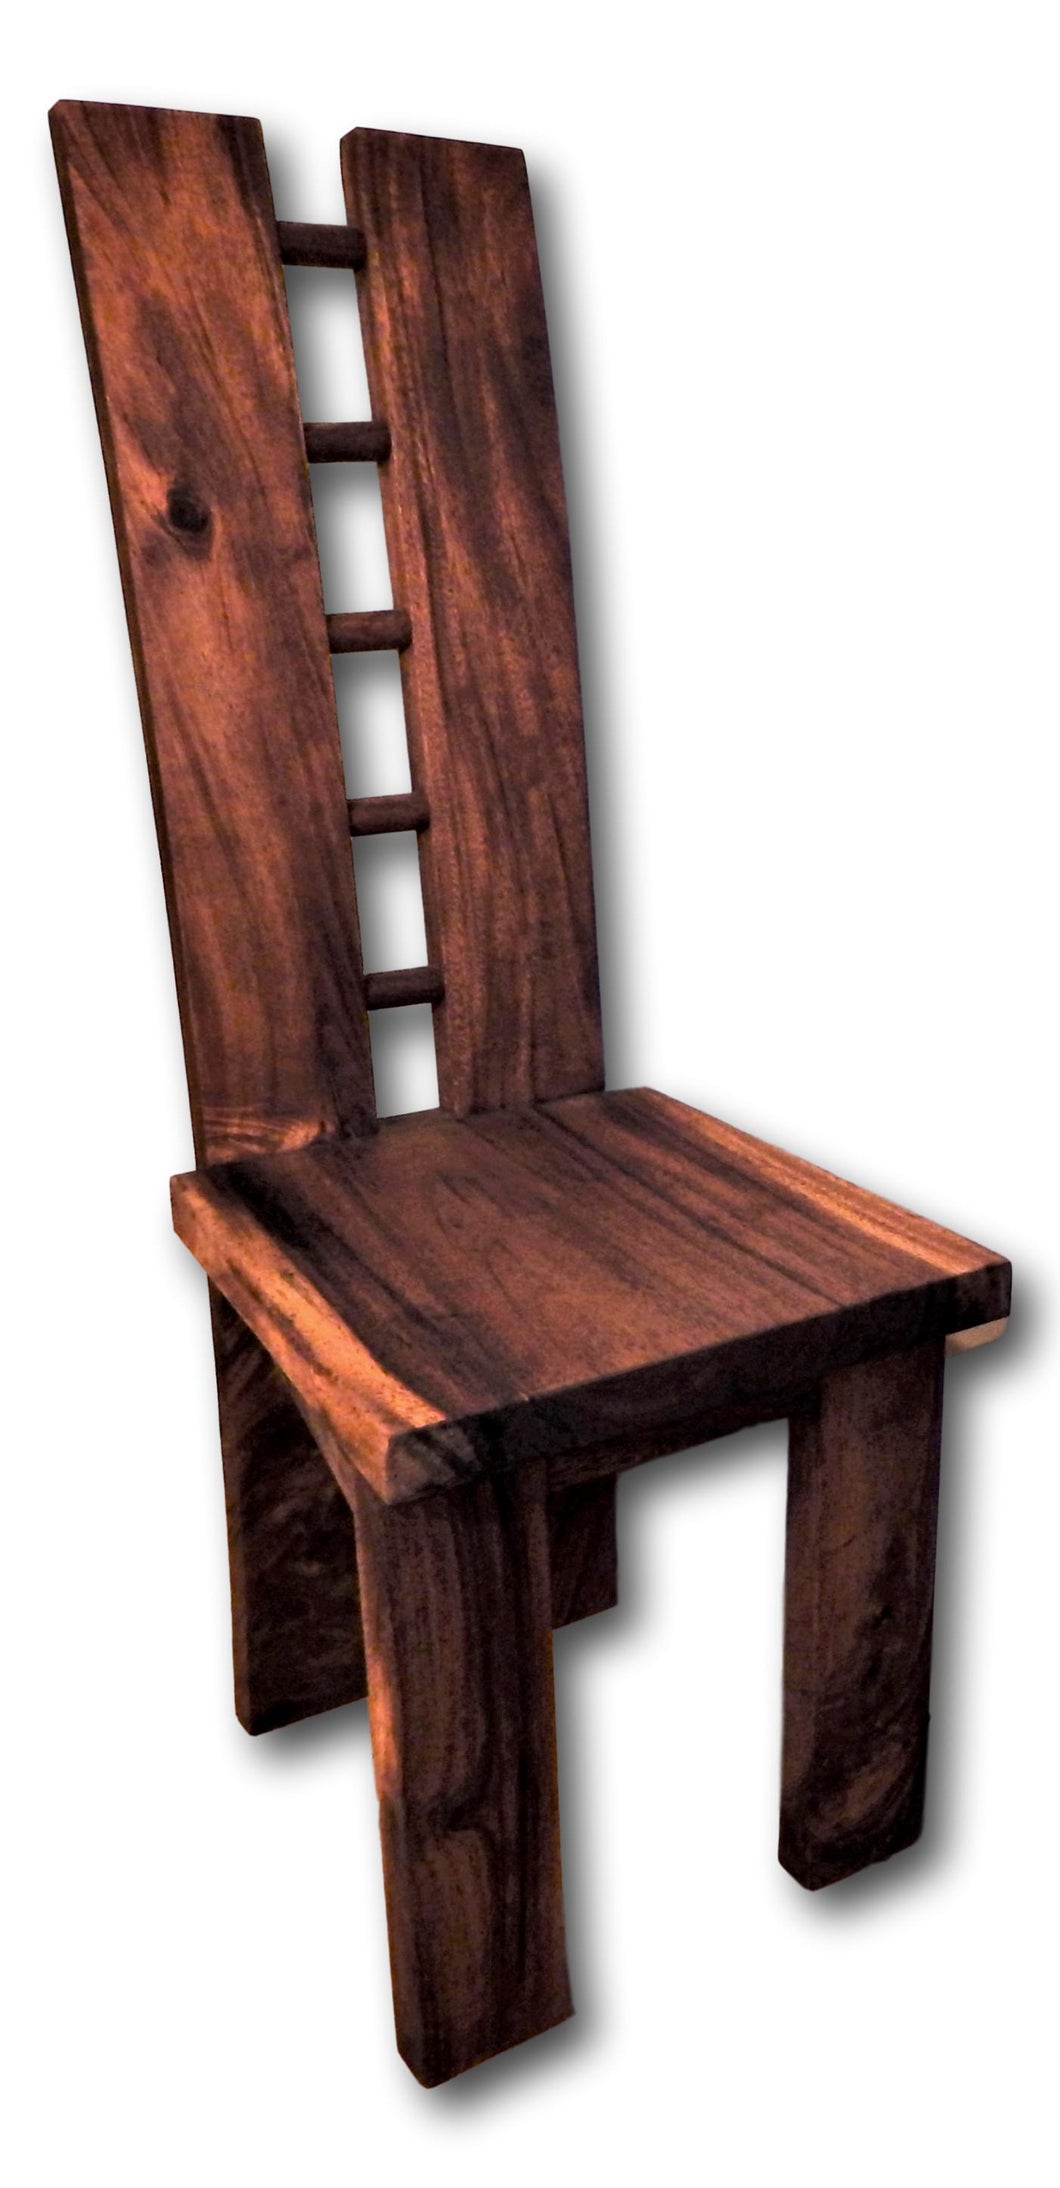 Buying Wood Chair Online: Roots Cabinets & Tiles